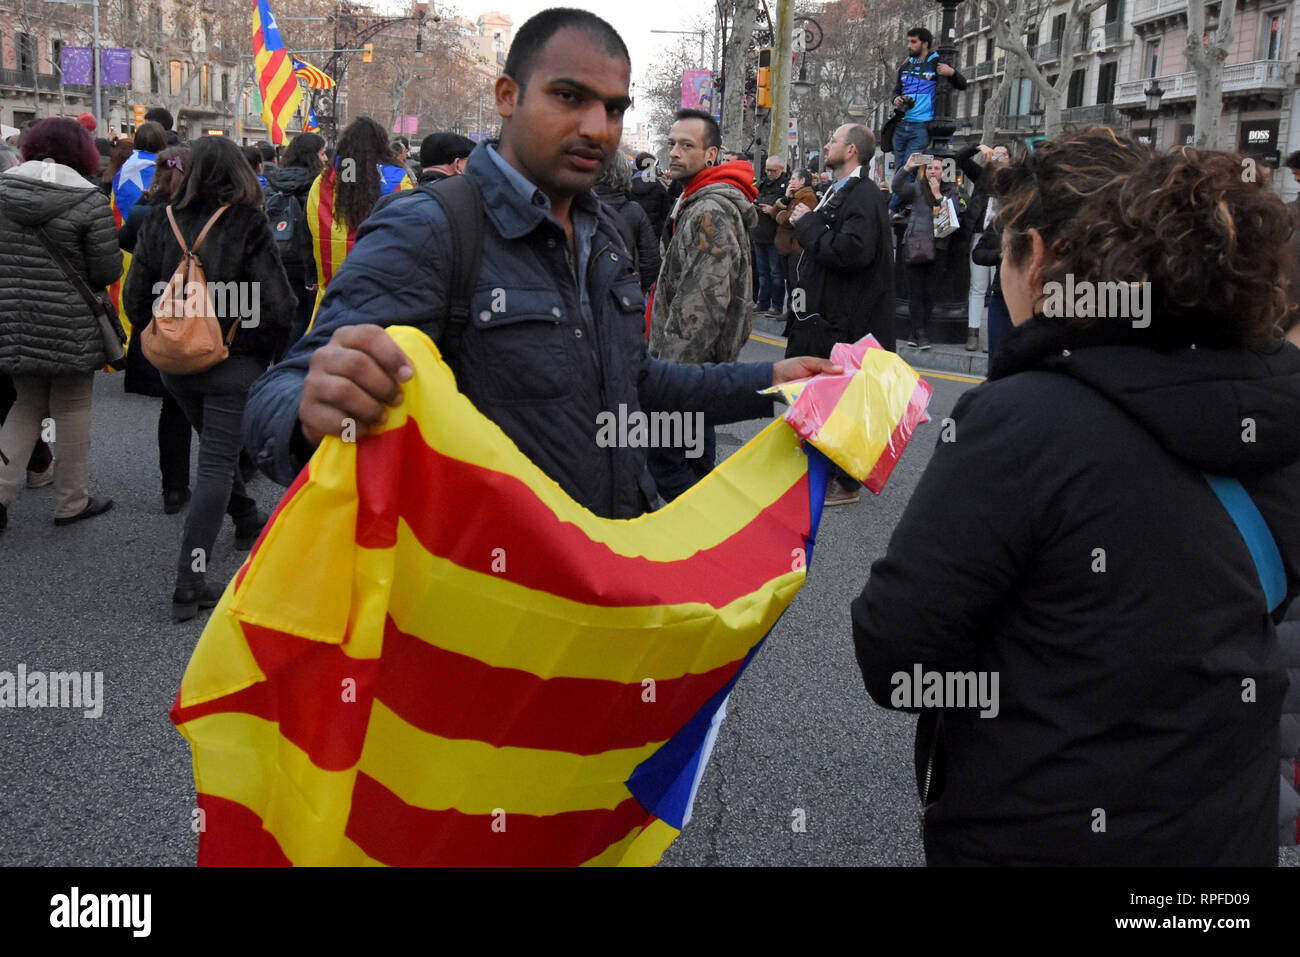 A man of Pakistani nationality sells flags of the independence of Catalonia seen during a general strike in the streets of Barcelona to demand freedom, human right and against the trial of the political prisoners at the Supreme Court. Stock Photo